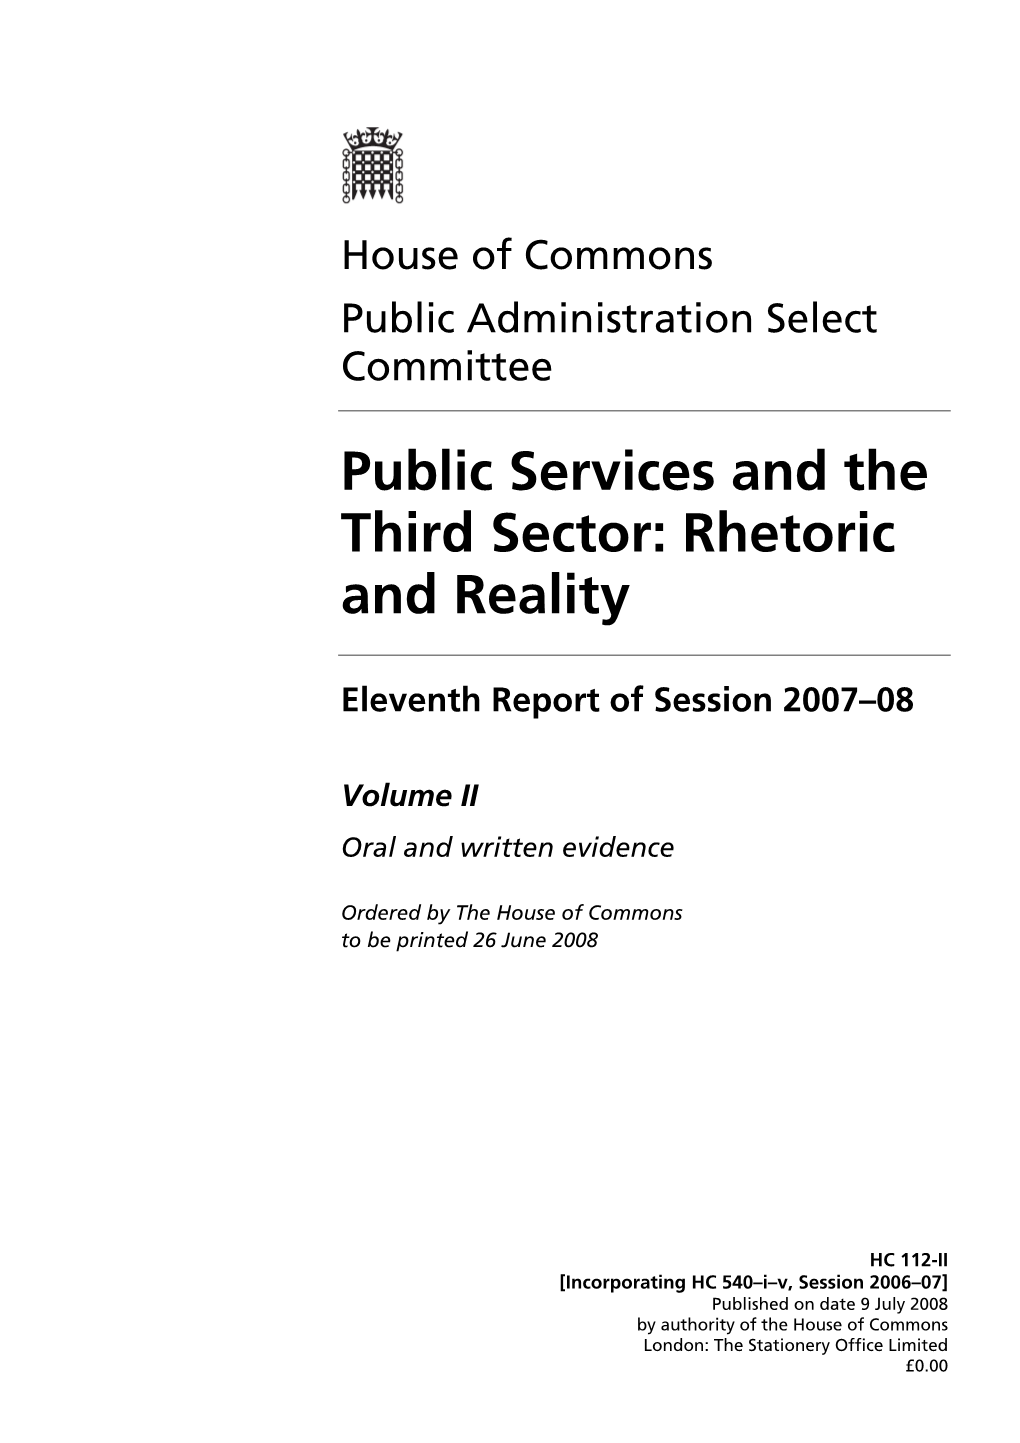 Public Services and the Third Sector: Rhetoric and Reality